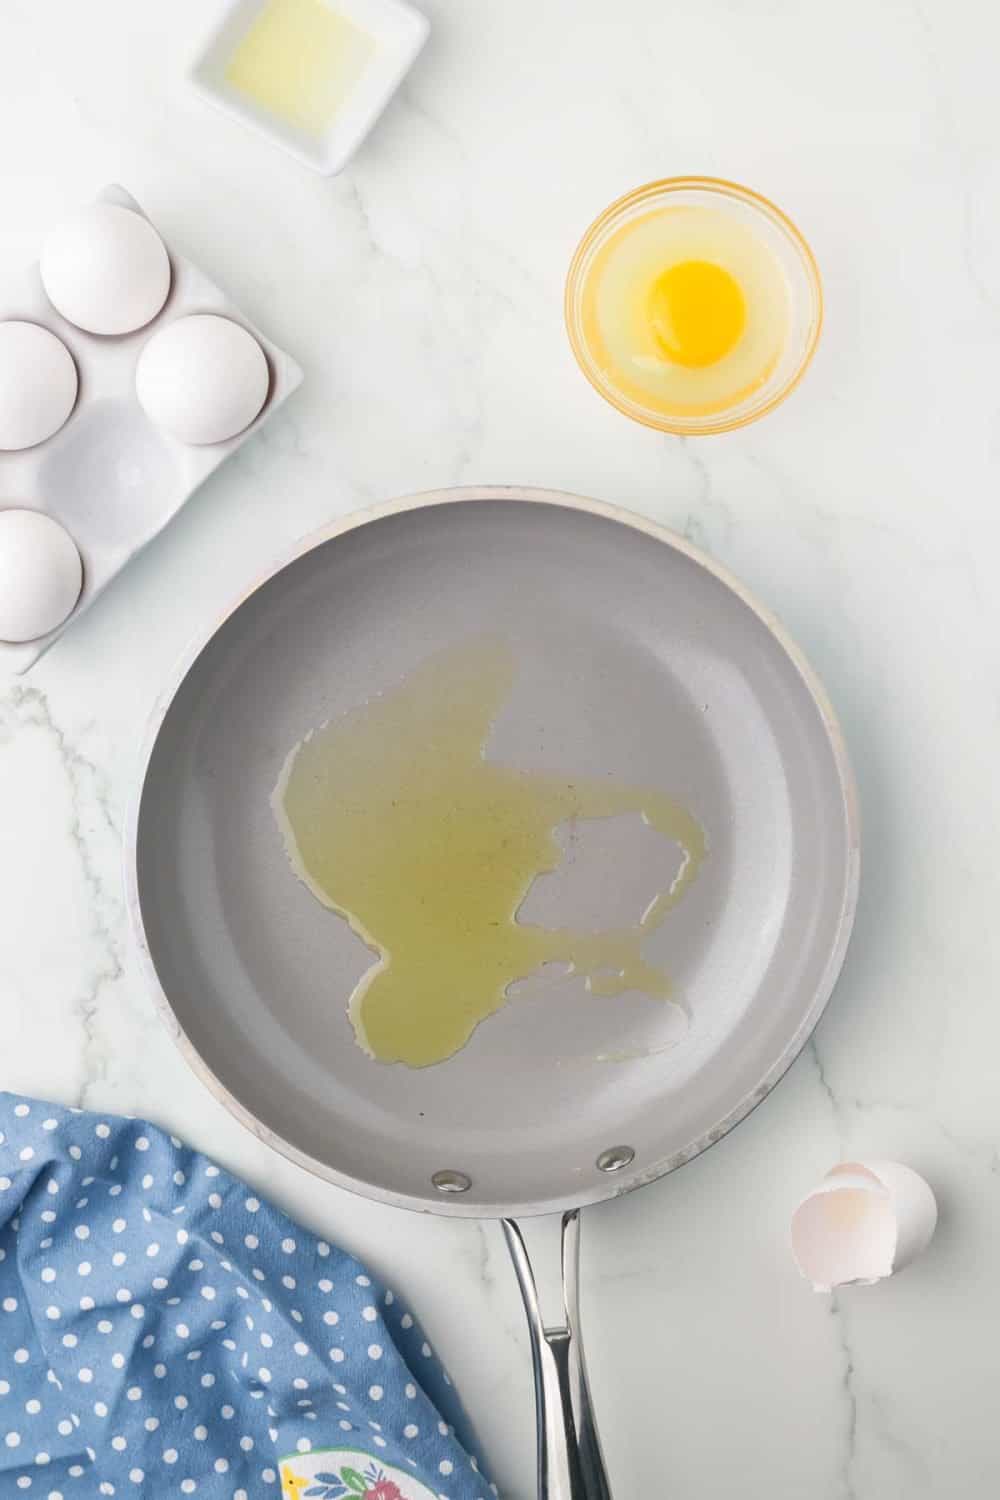 pan with oil ready to fry an egg